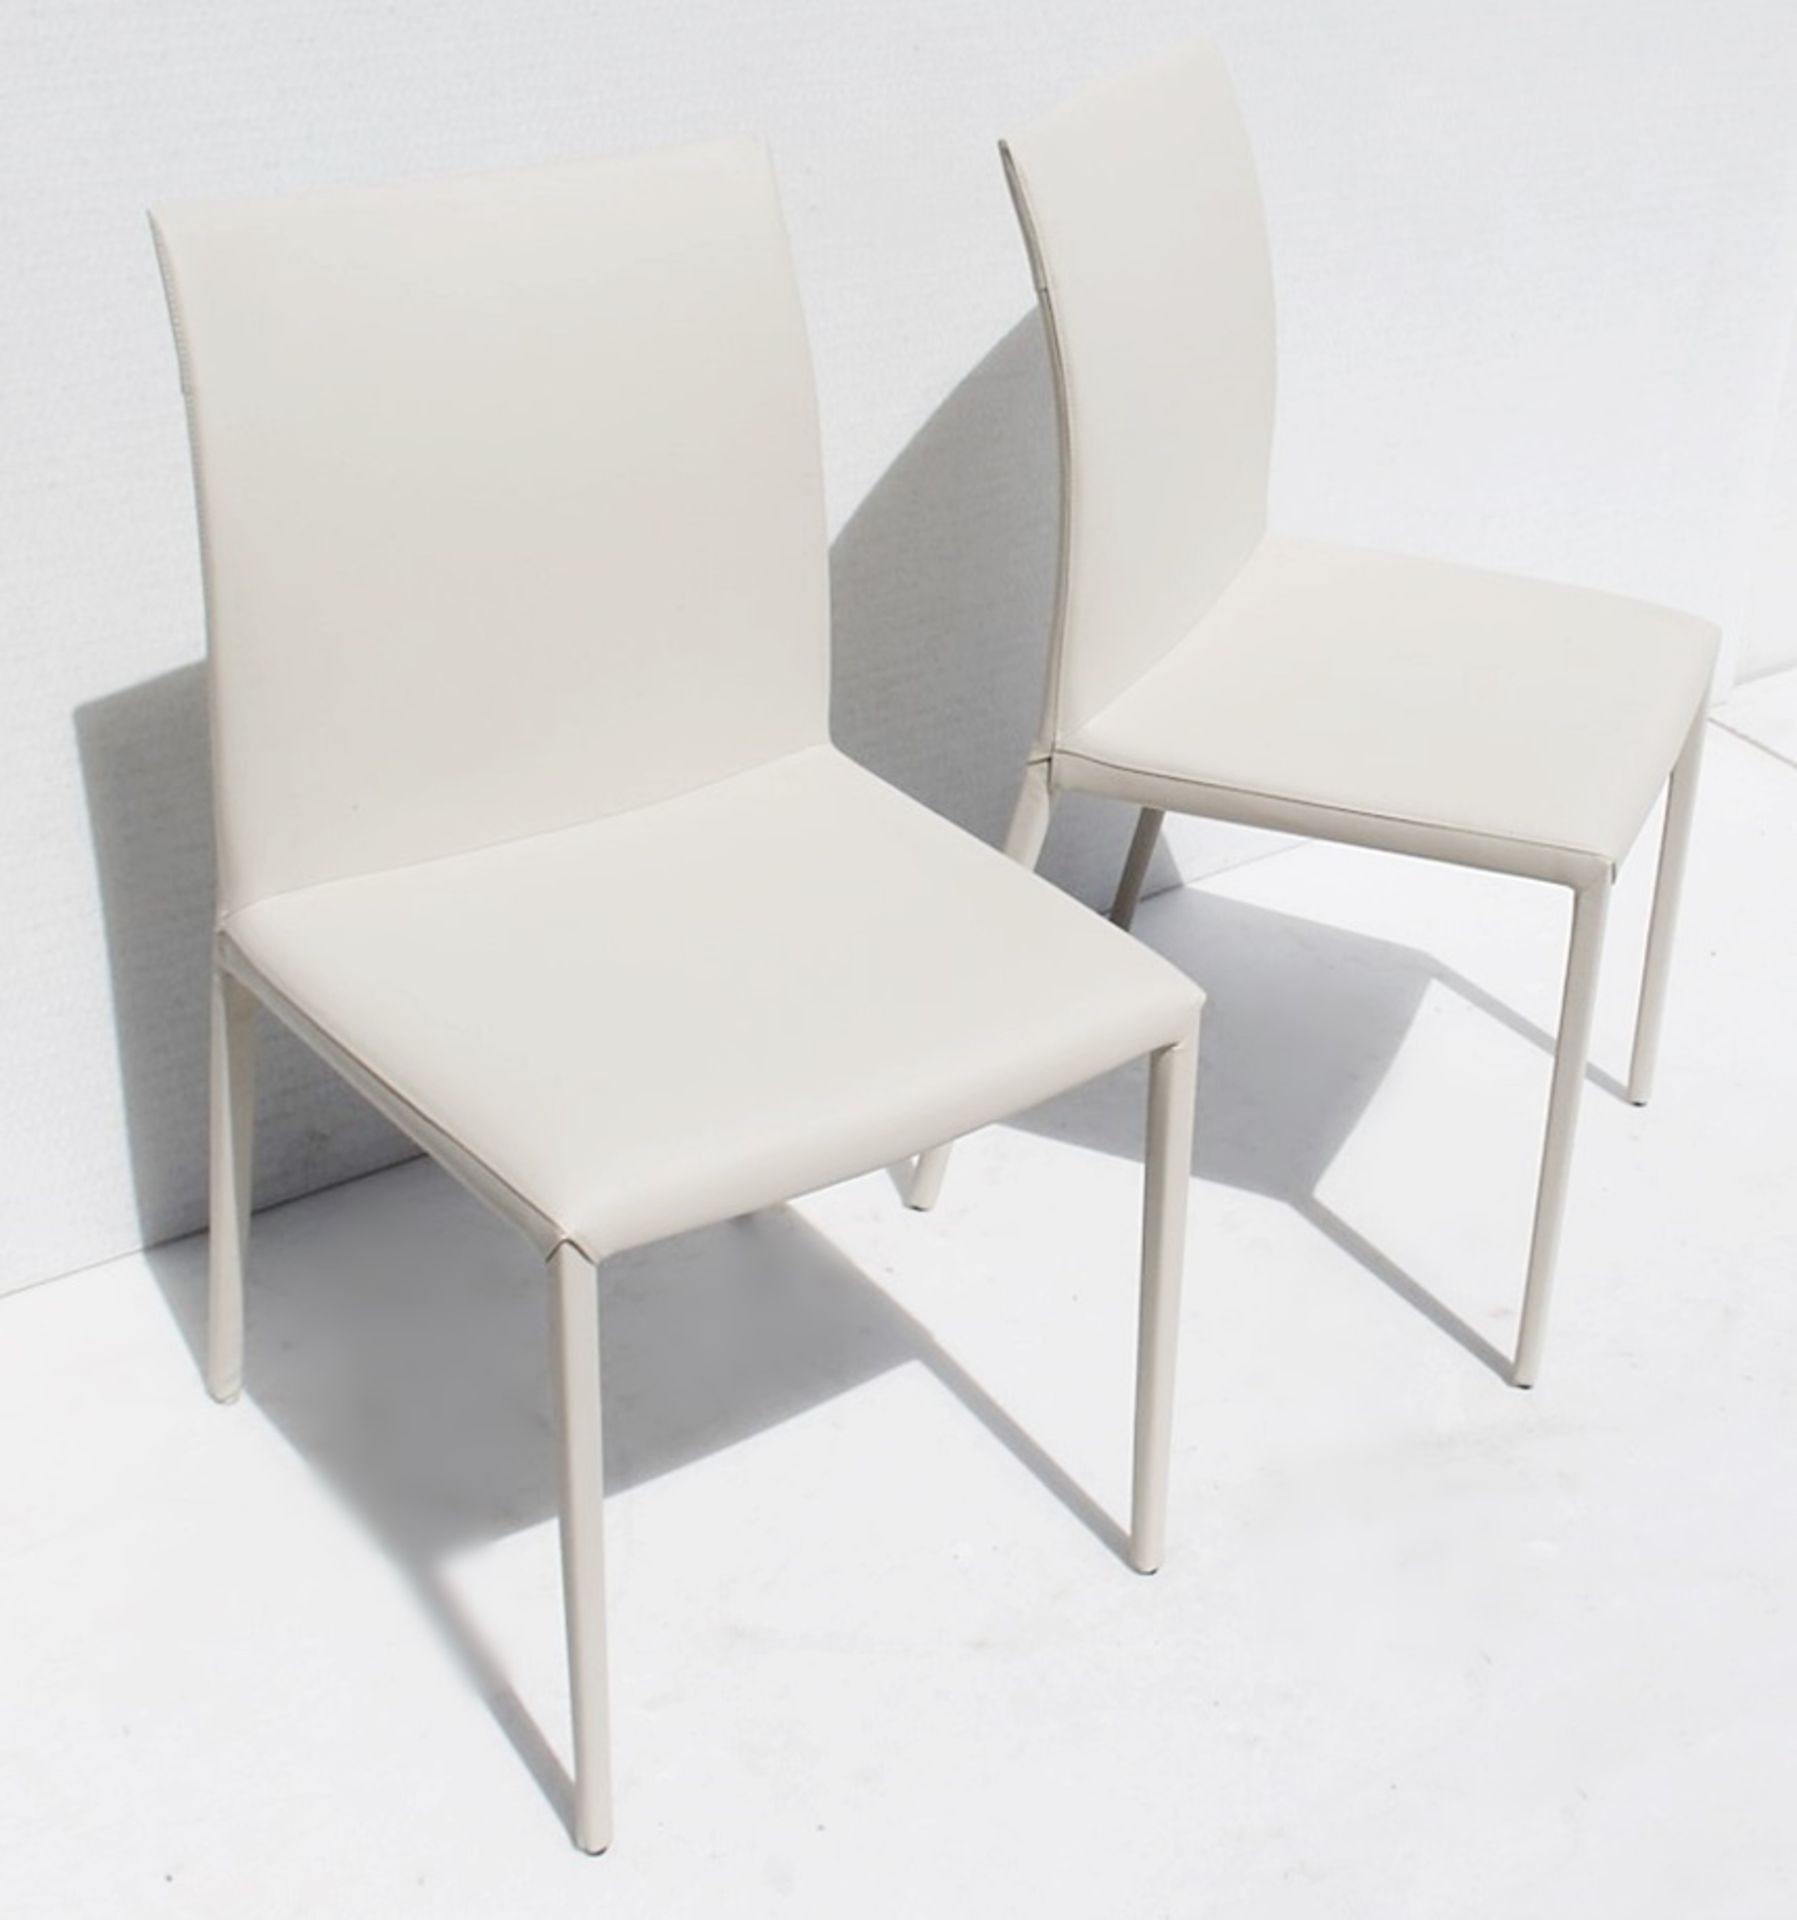 Pair Of CATELLAN 'Norma' Designer Italian Leather Chairs With Curved Backs In A Pale Taupe - Image 5 of 6